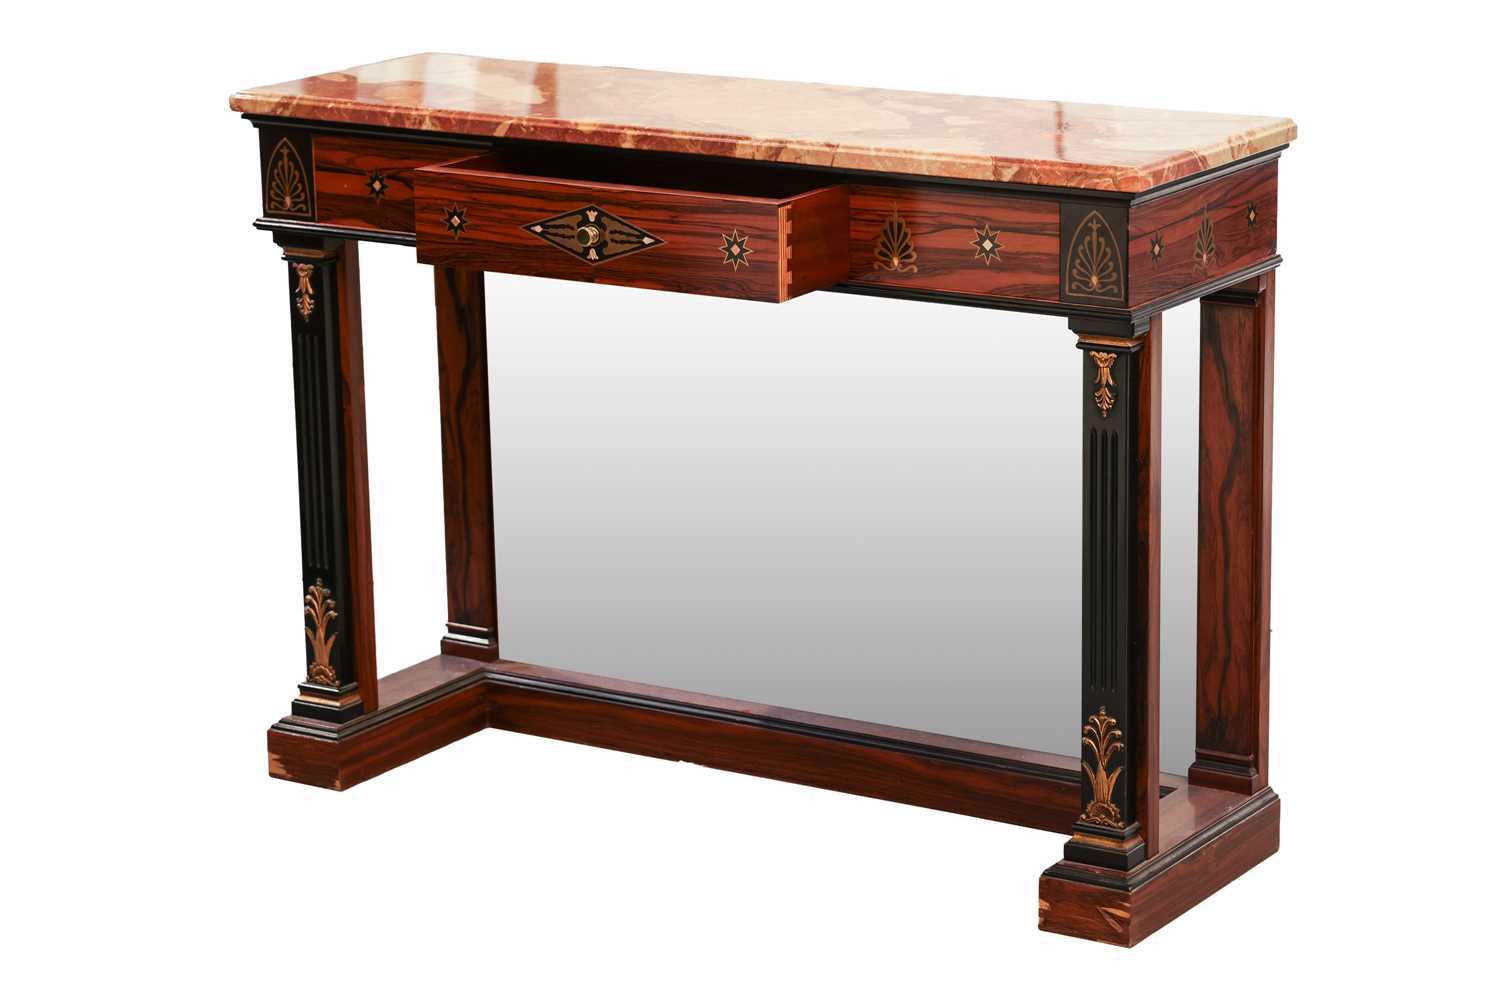 A 20th century French Empire style marble-topped brass marquetry inlaid zebrano side table, with a s - Image 2 of 5